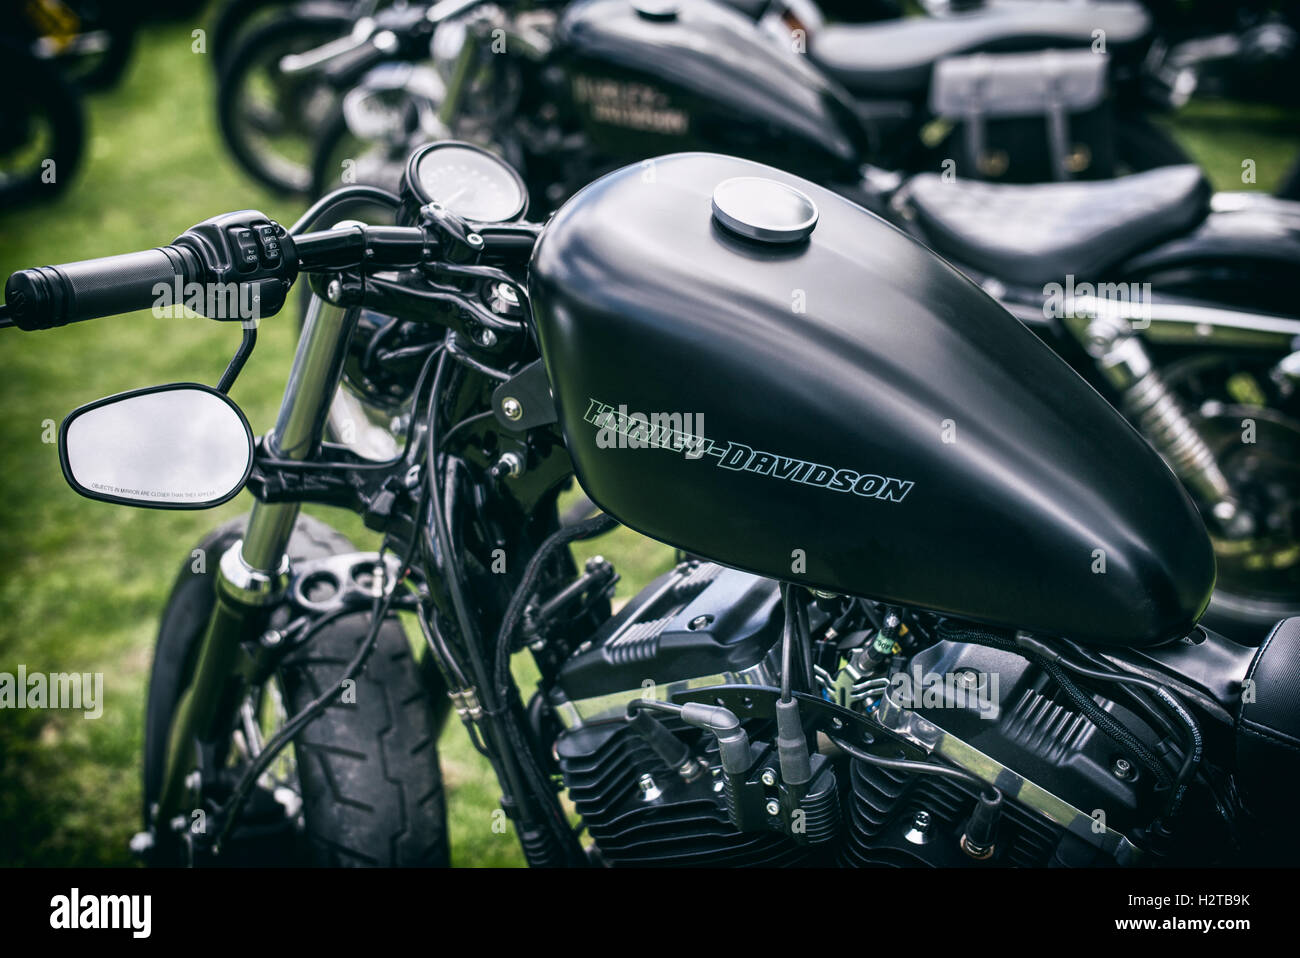 Customized Harley Davidson Sportster motorcycle. Vintage Filter Applied Stock Photo